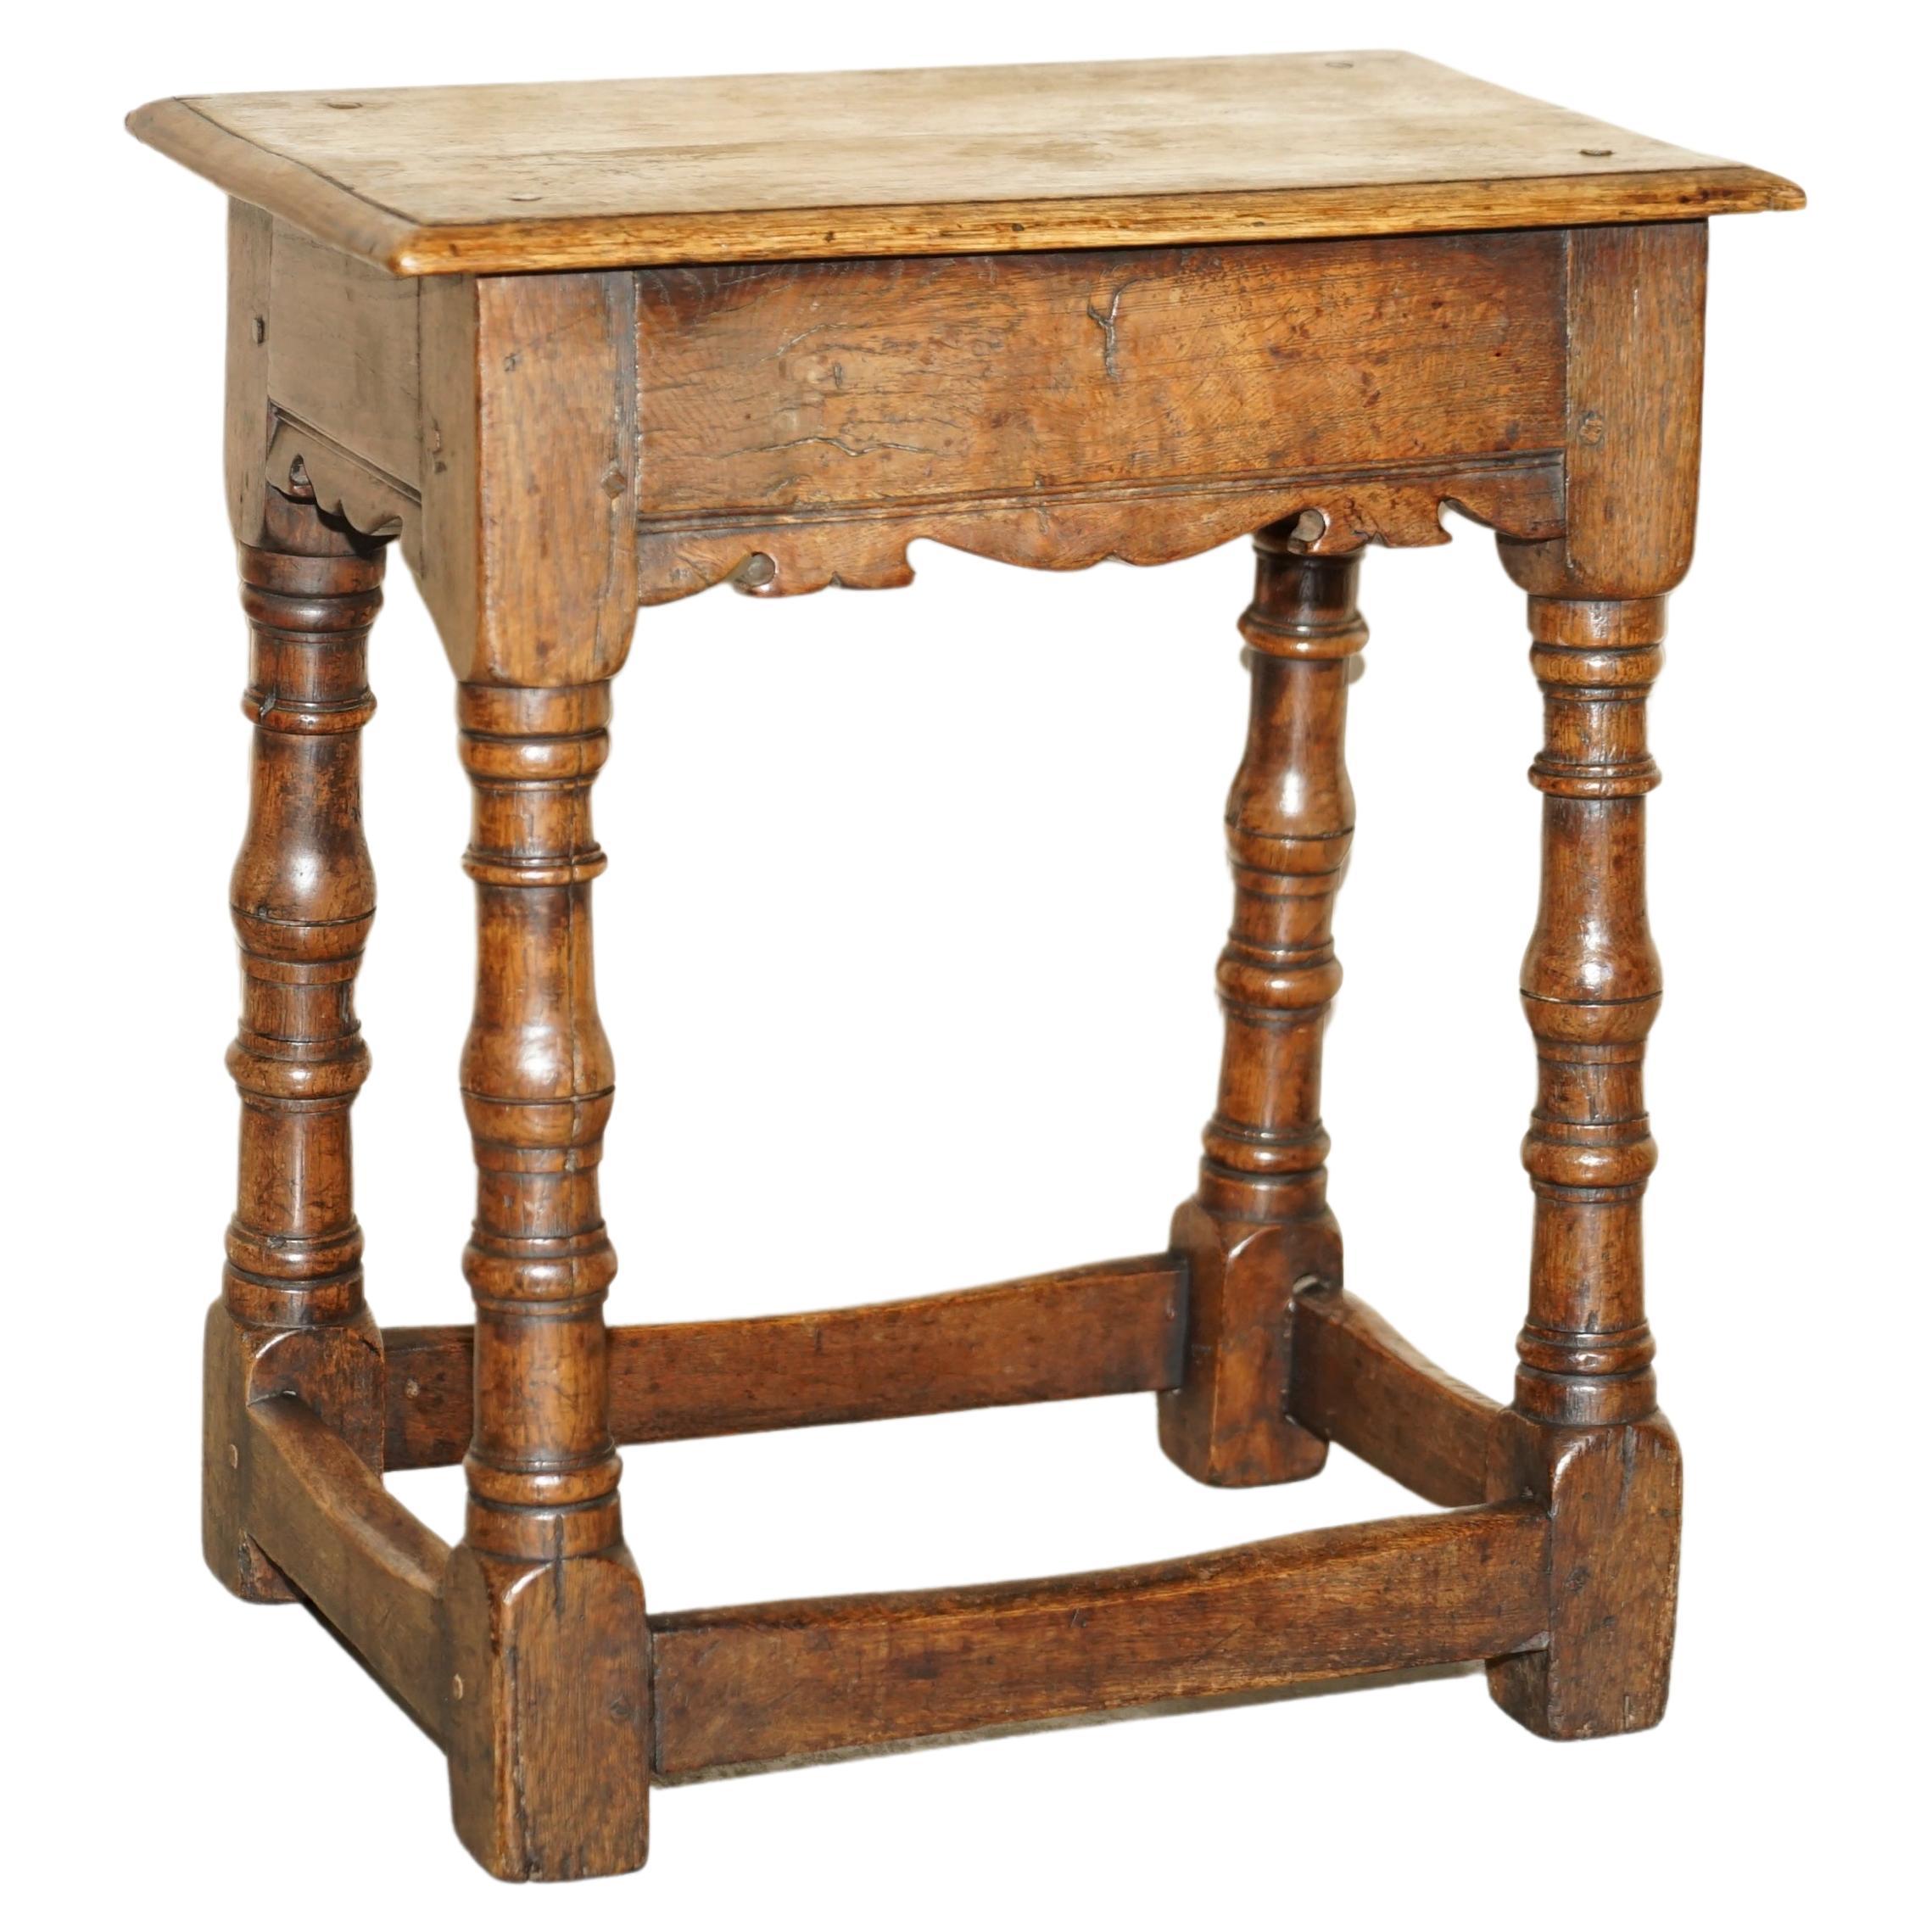 Stunning 18th Century circa 1760 English Oak Jointed Stool or Side End Table For Sale